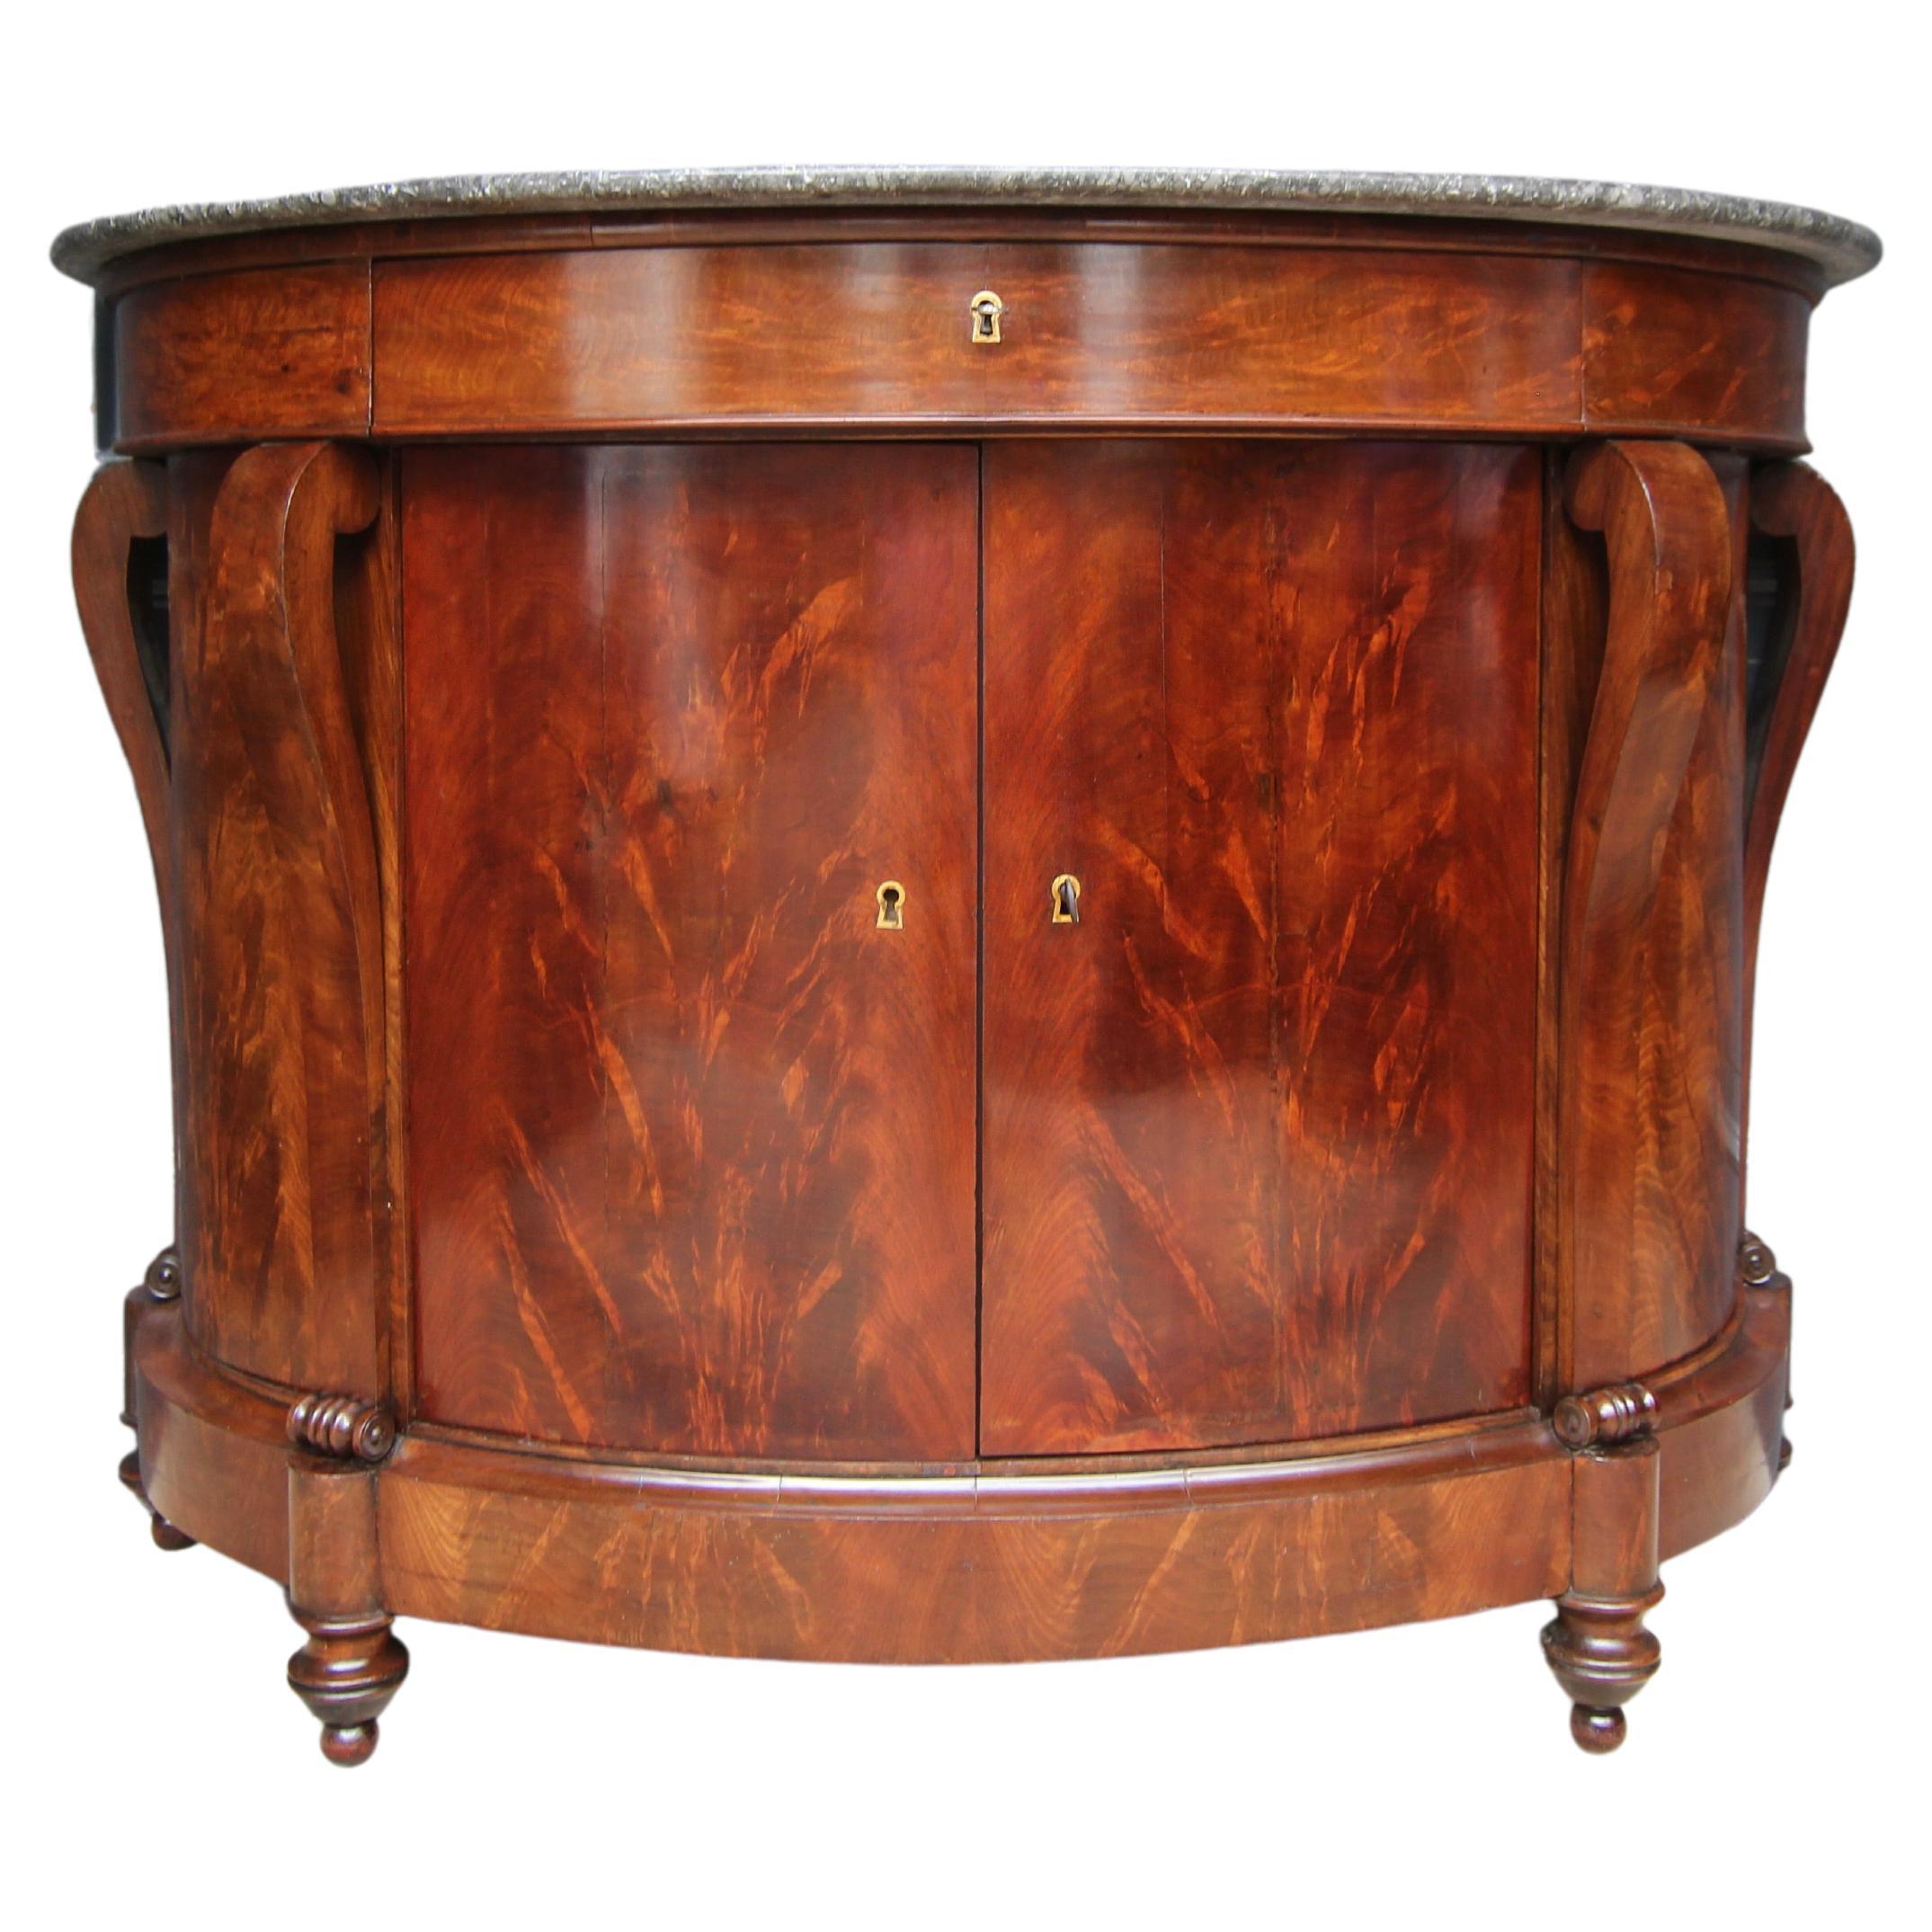 Early 19th Century French Empire Mahogany Demilune Cabinet